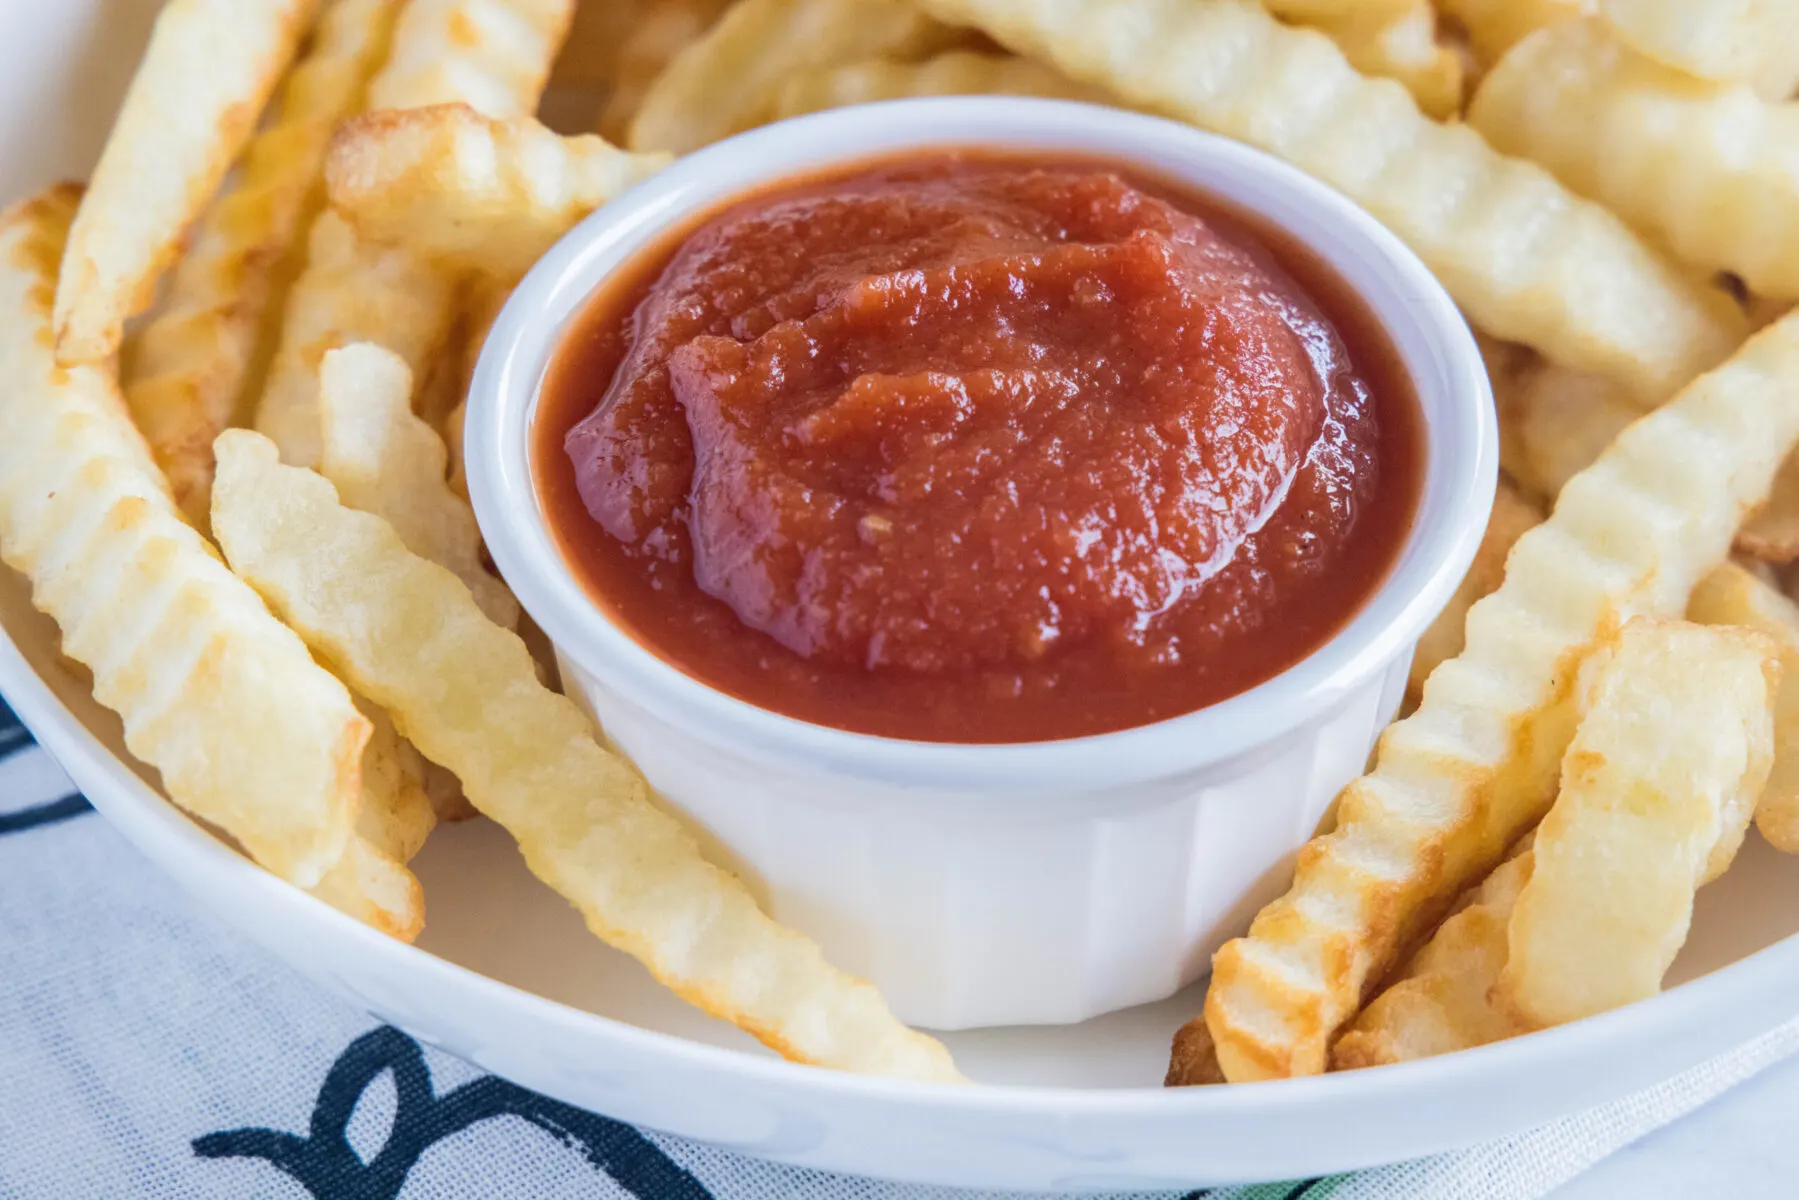 A ramekin of ketchup surrounded by fries